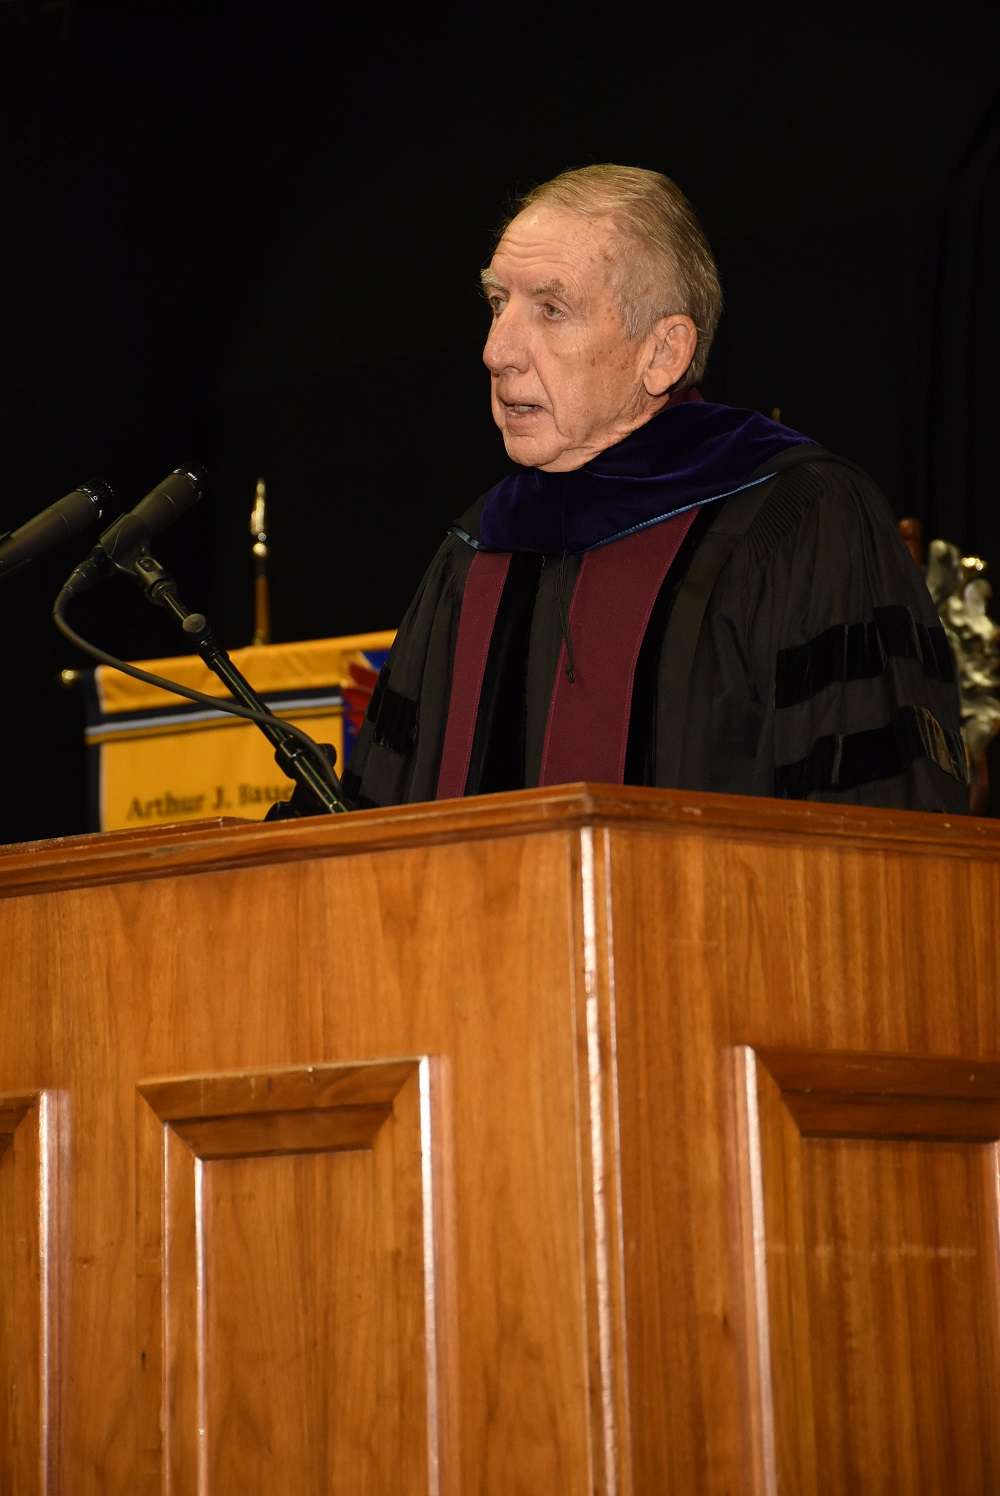 Justice Bill Cunningham at commencement